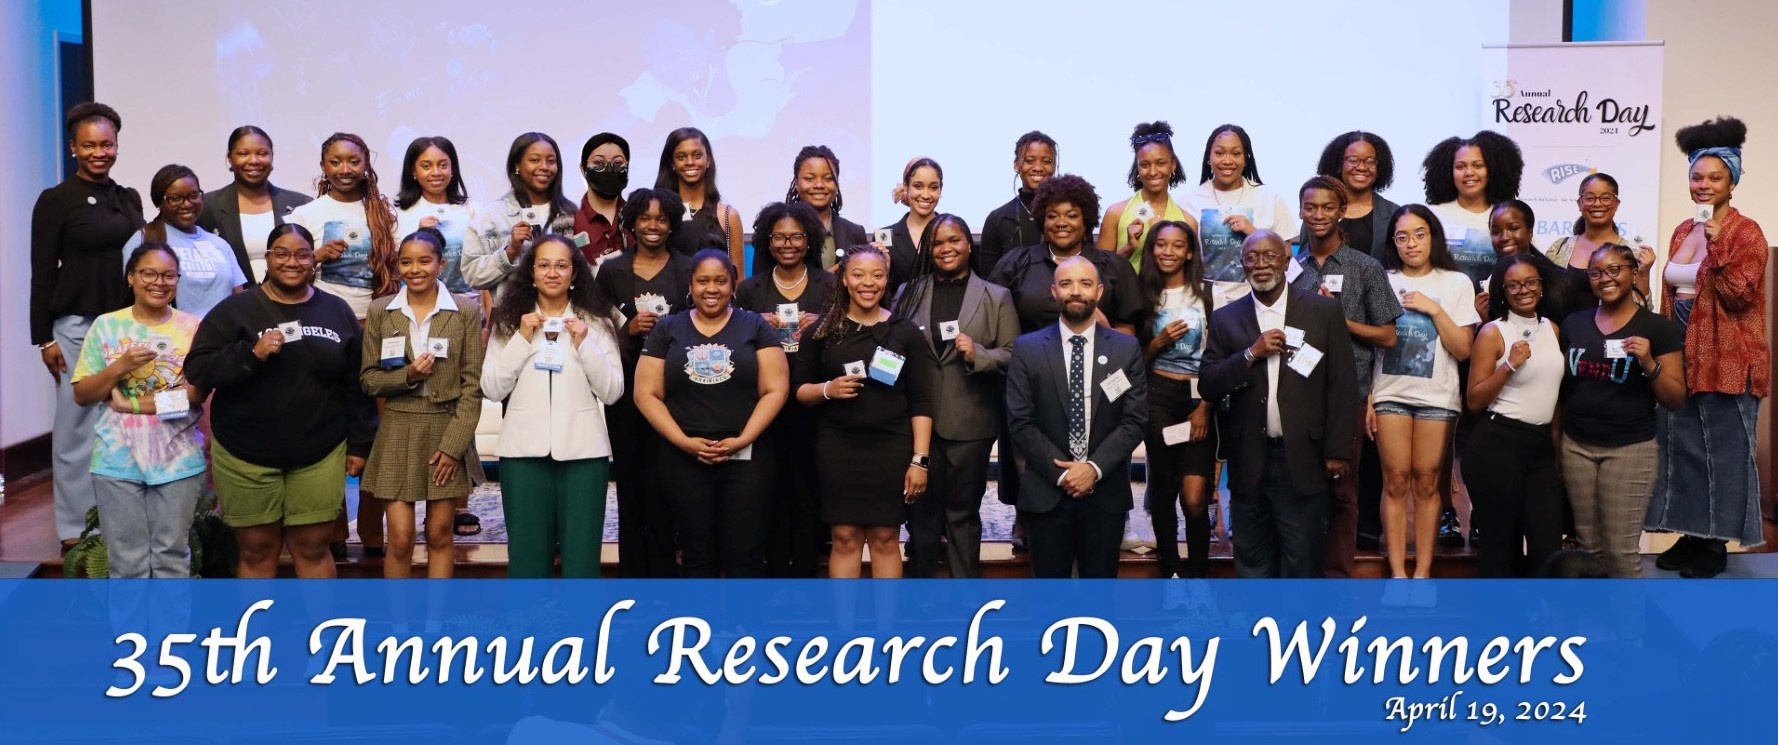 Research Day winners